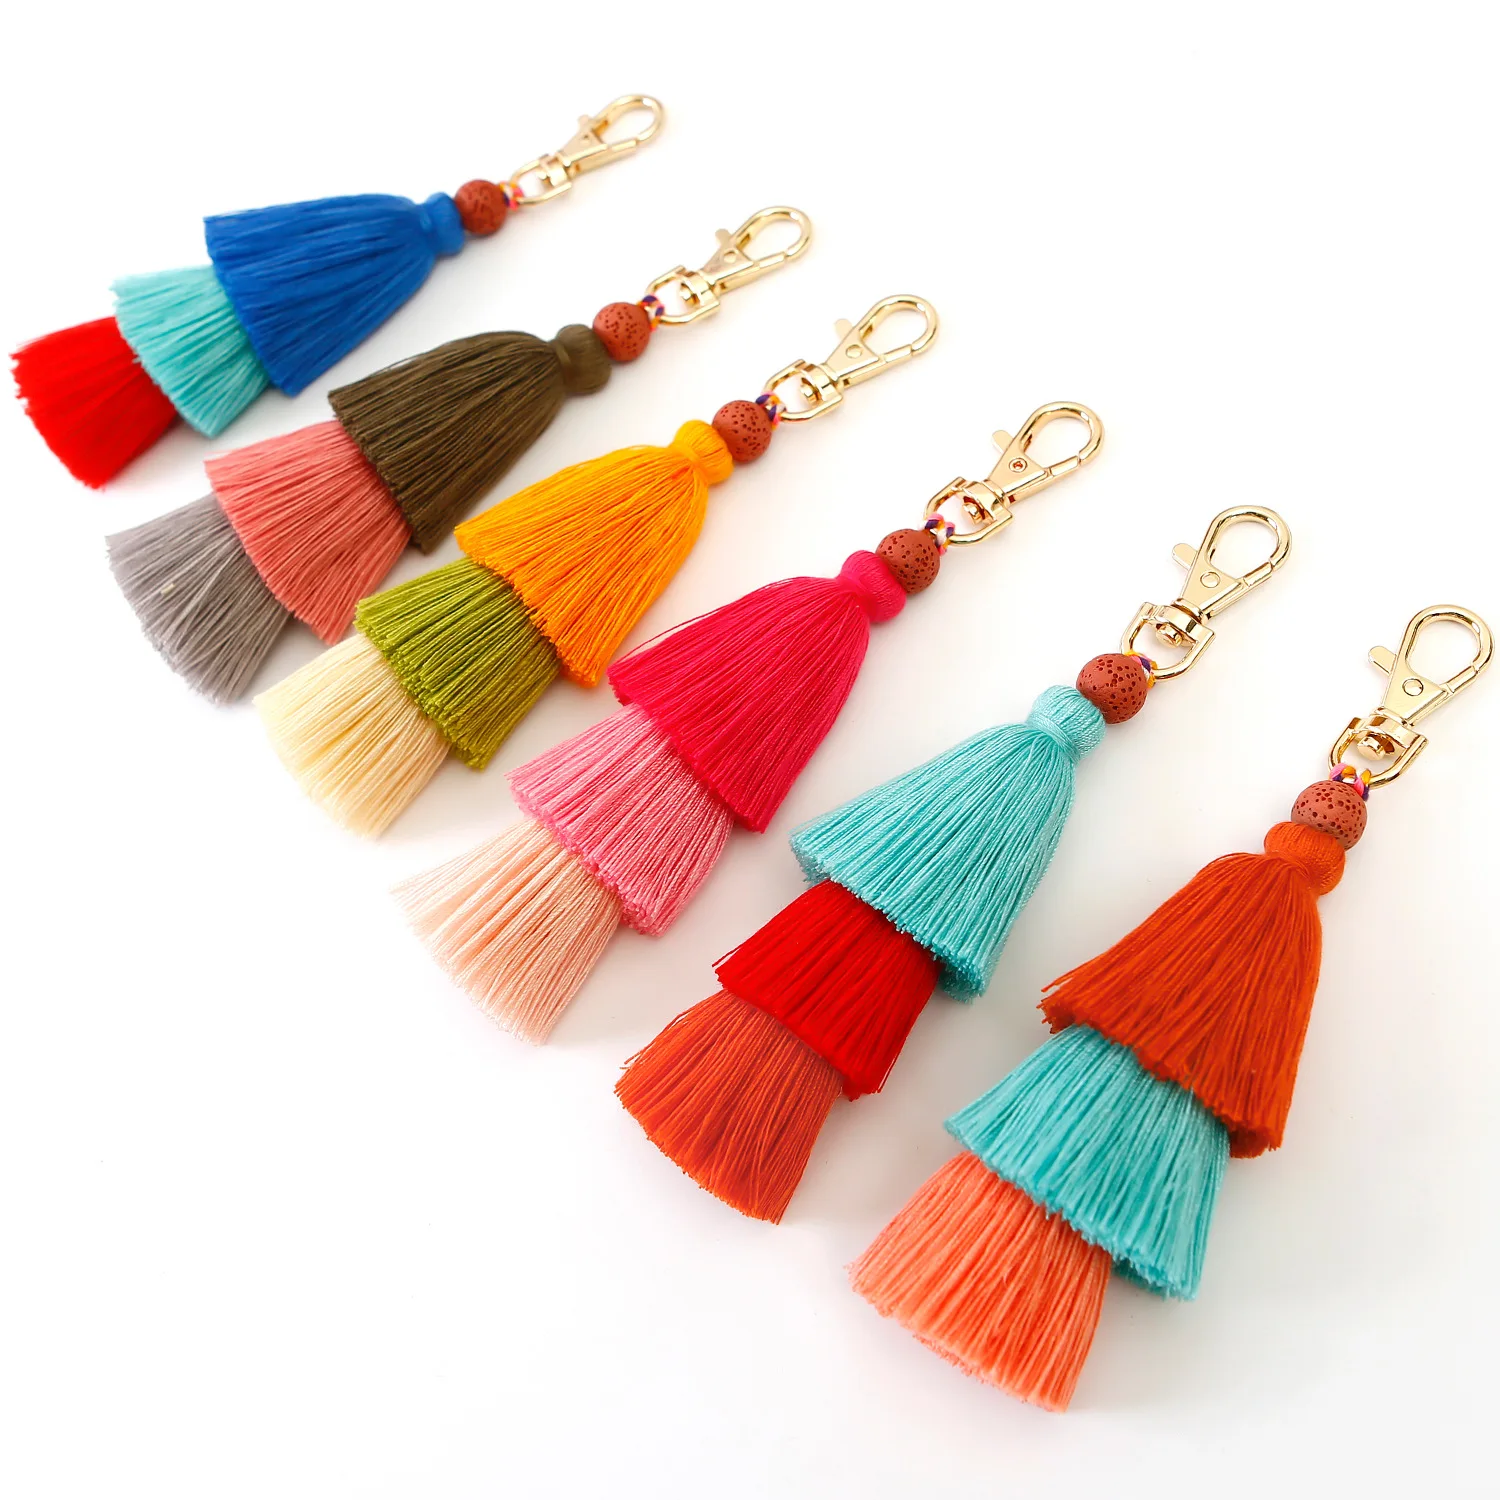 

3 layered / Tier Tassel Charms Keychain Bohemian Chic Style Tiered Fringe Cotton Tassels Keyring/Key Chain 14cm Favours Gifts